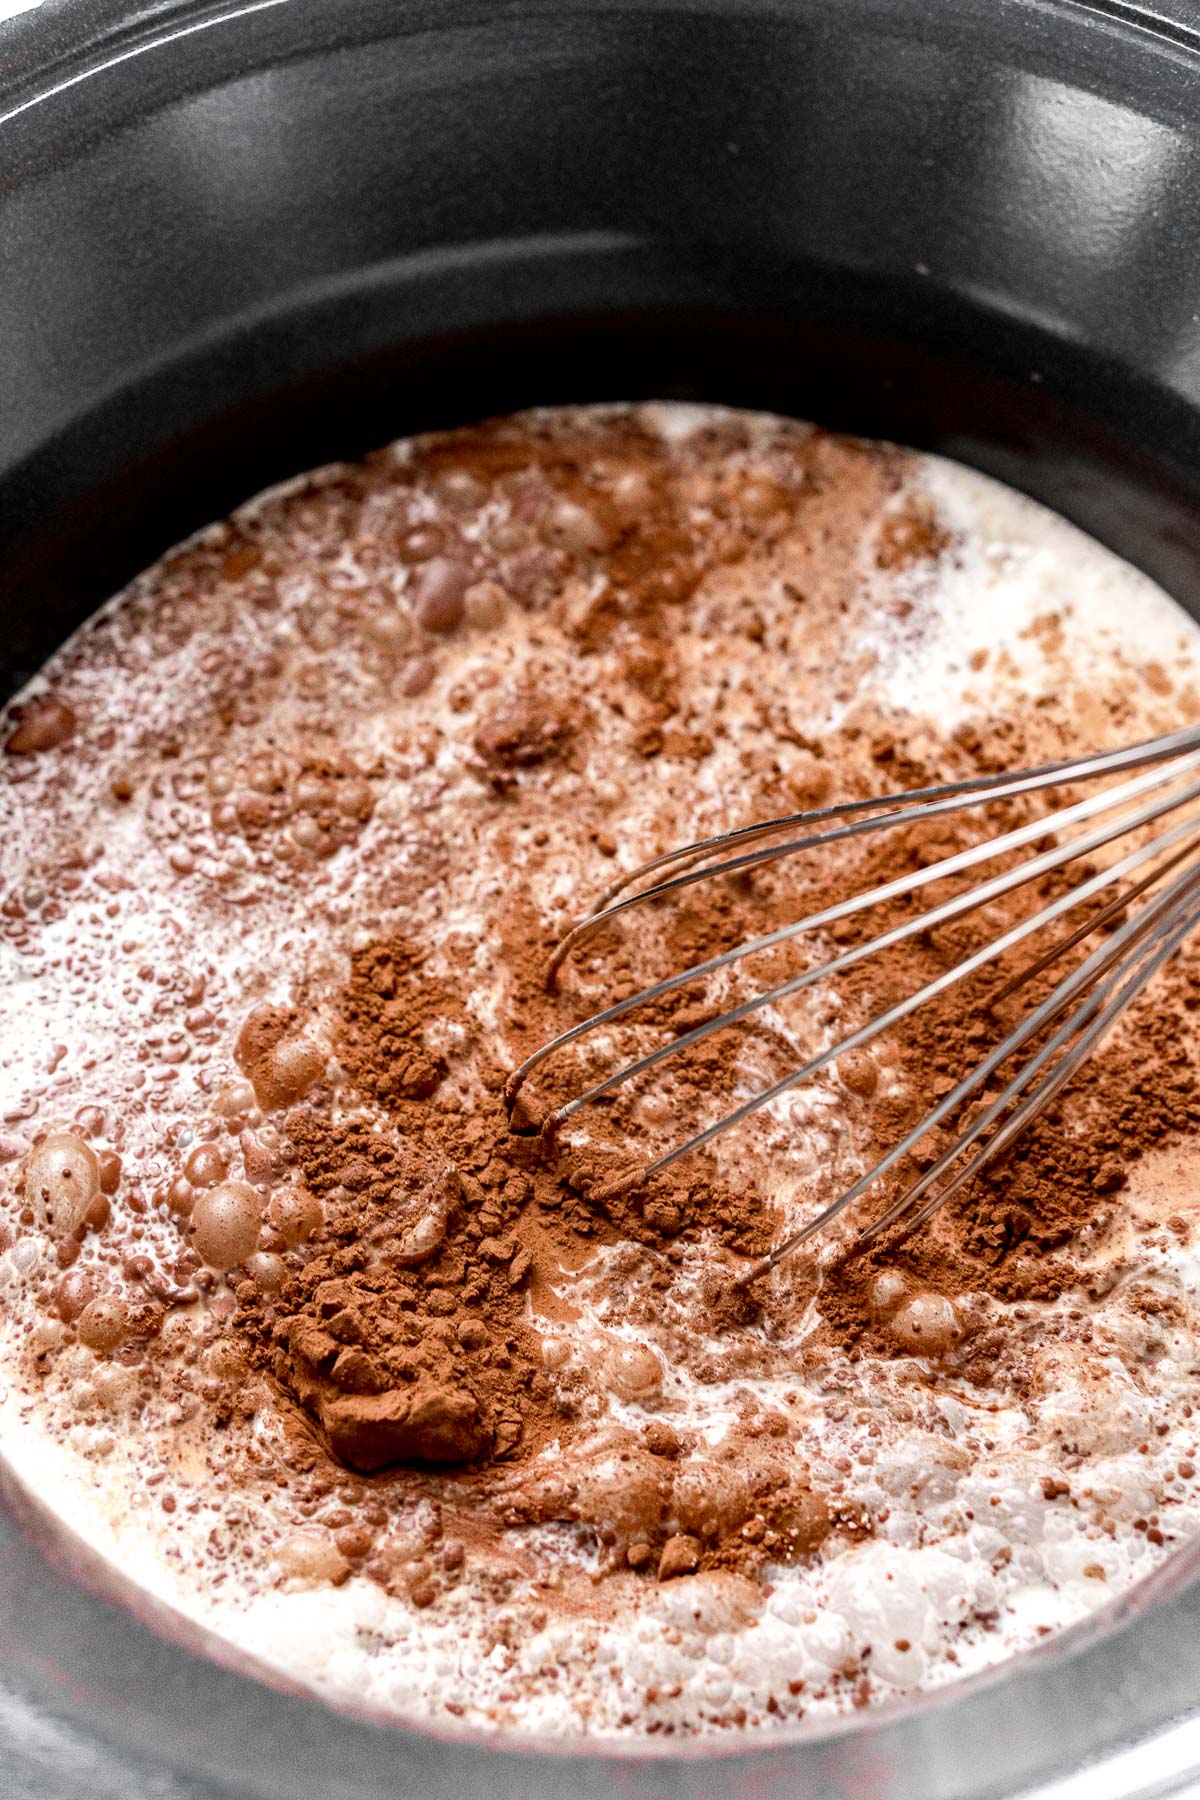 Hot chocolate ingredients being whisked together in a crockpot.